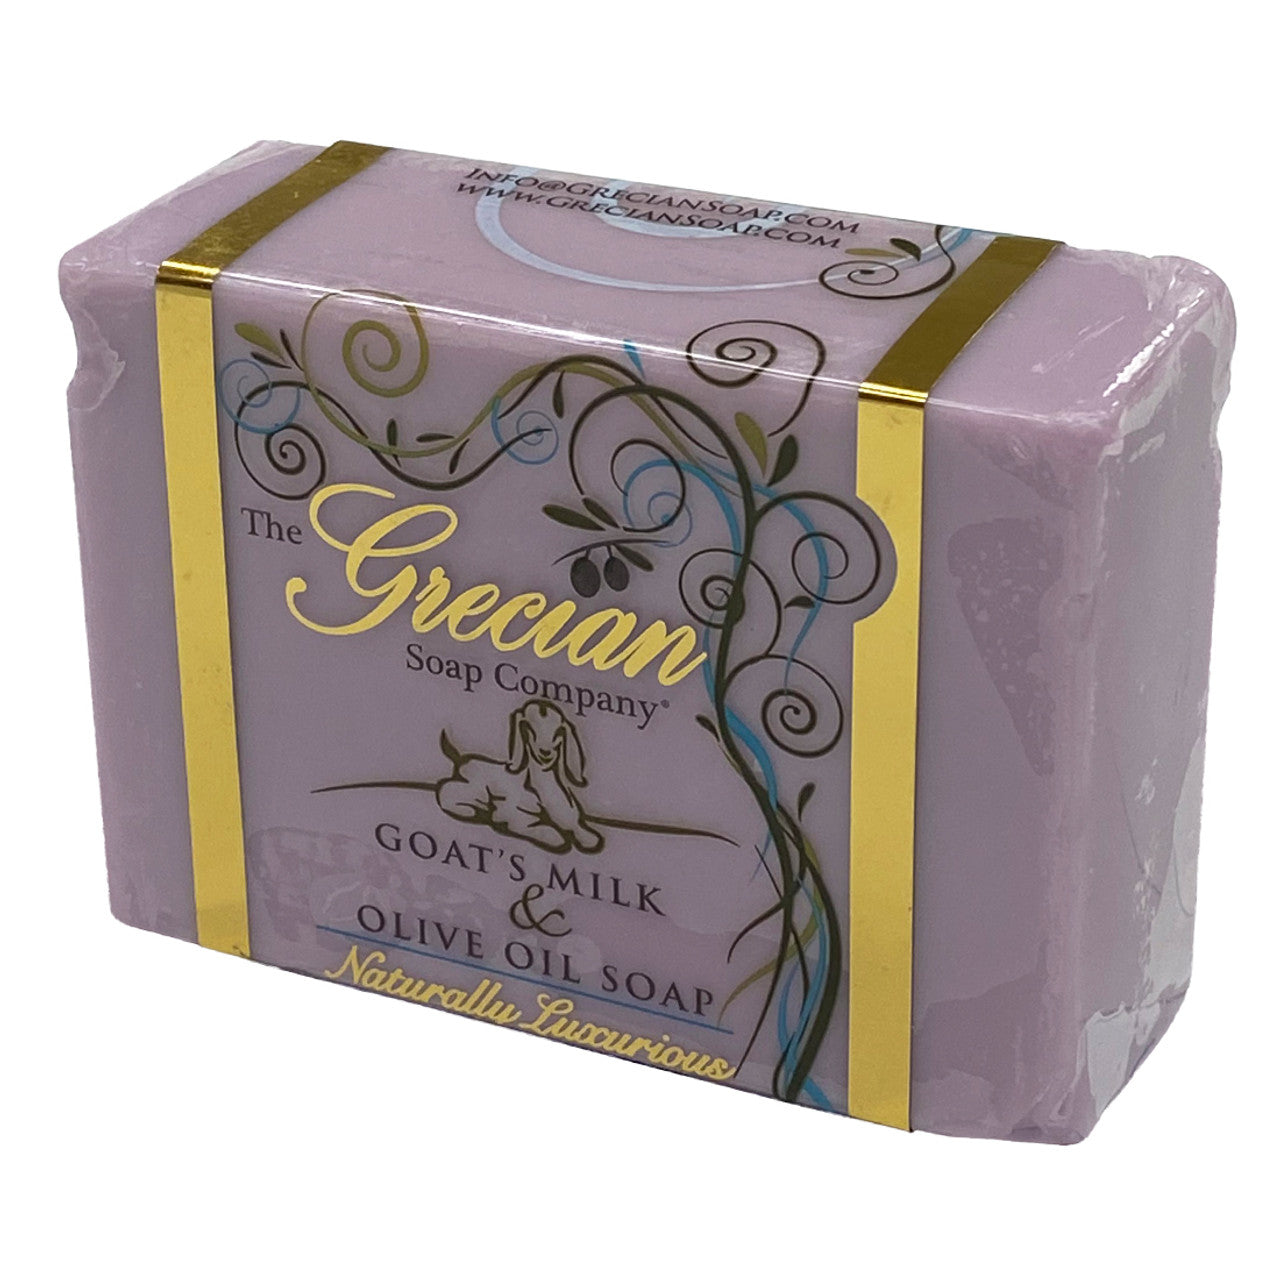 Lilac Goats Milk & Olive OIl Soap